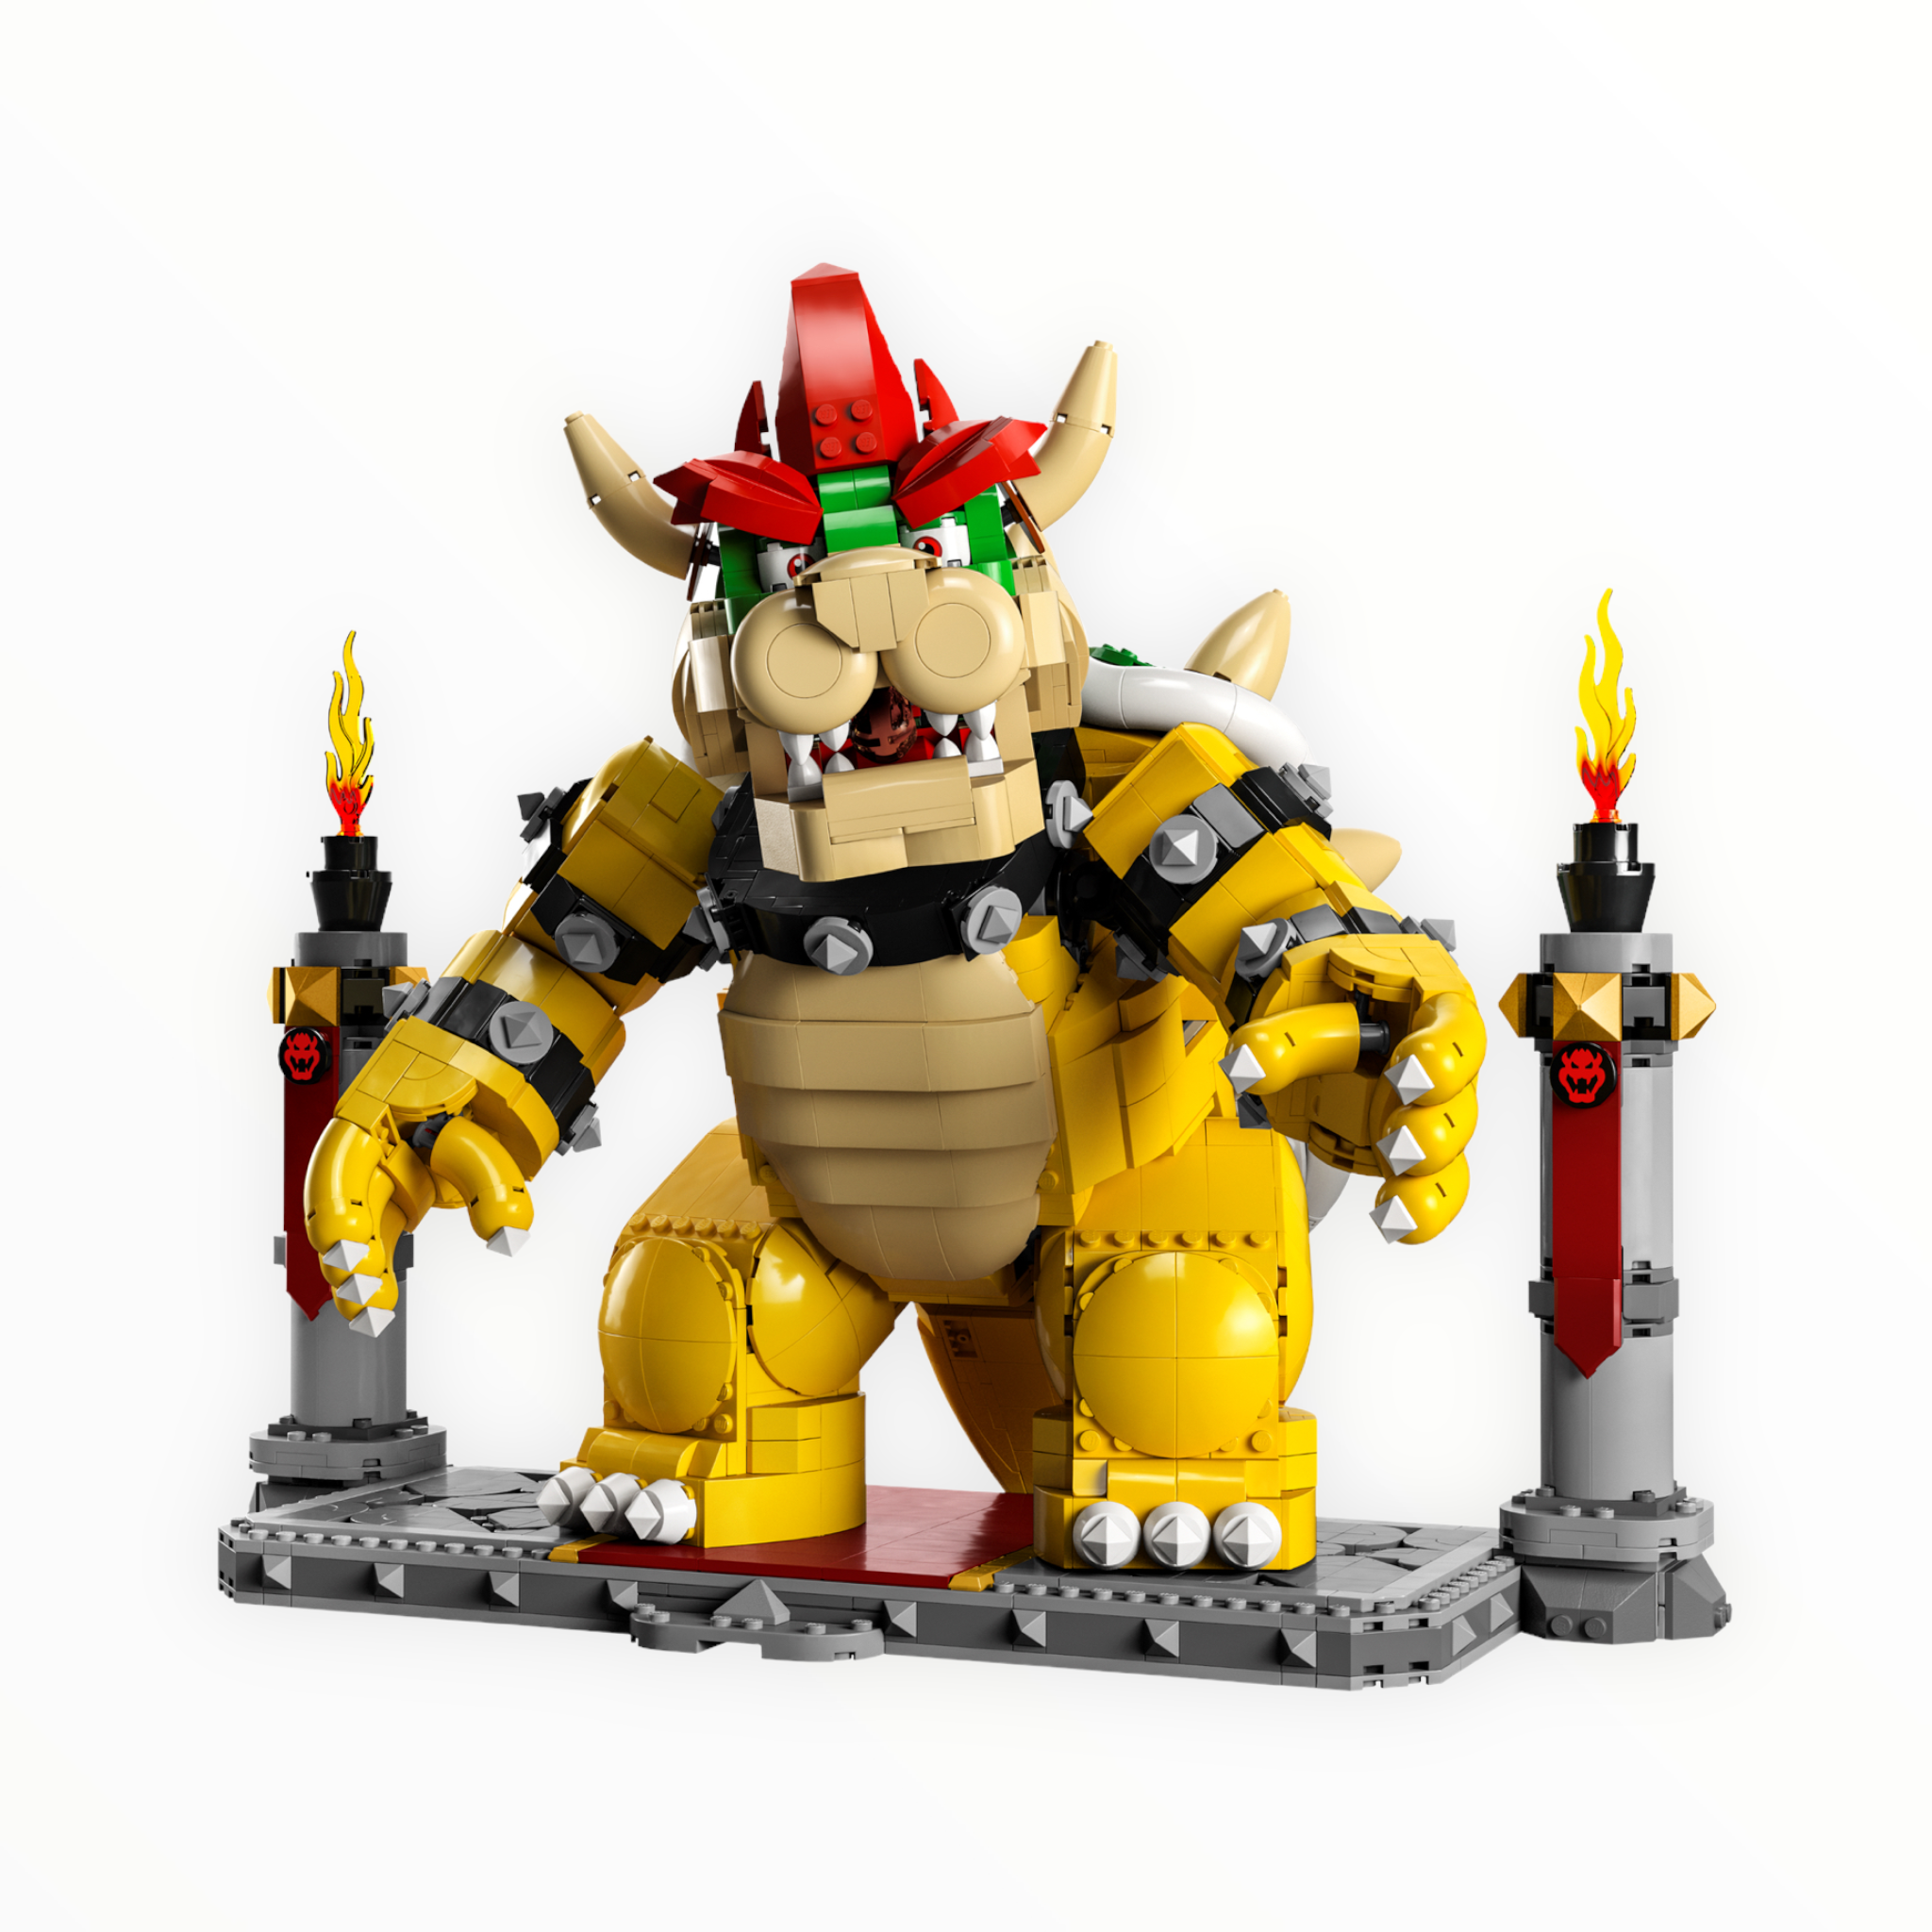 71411 Super Mario The Mighty Bowser